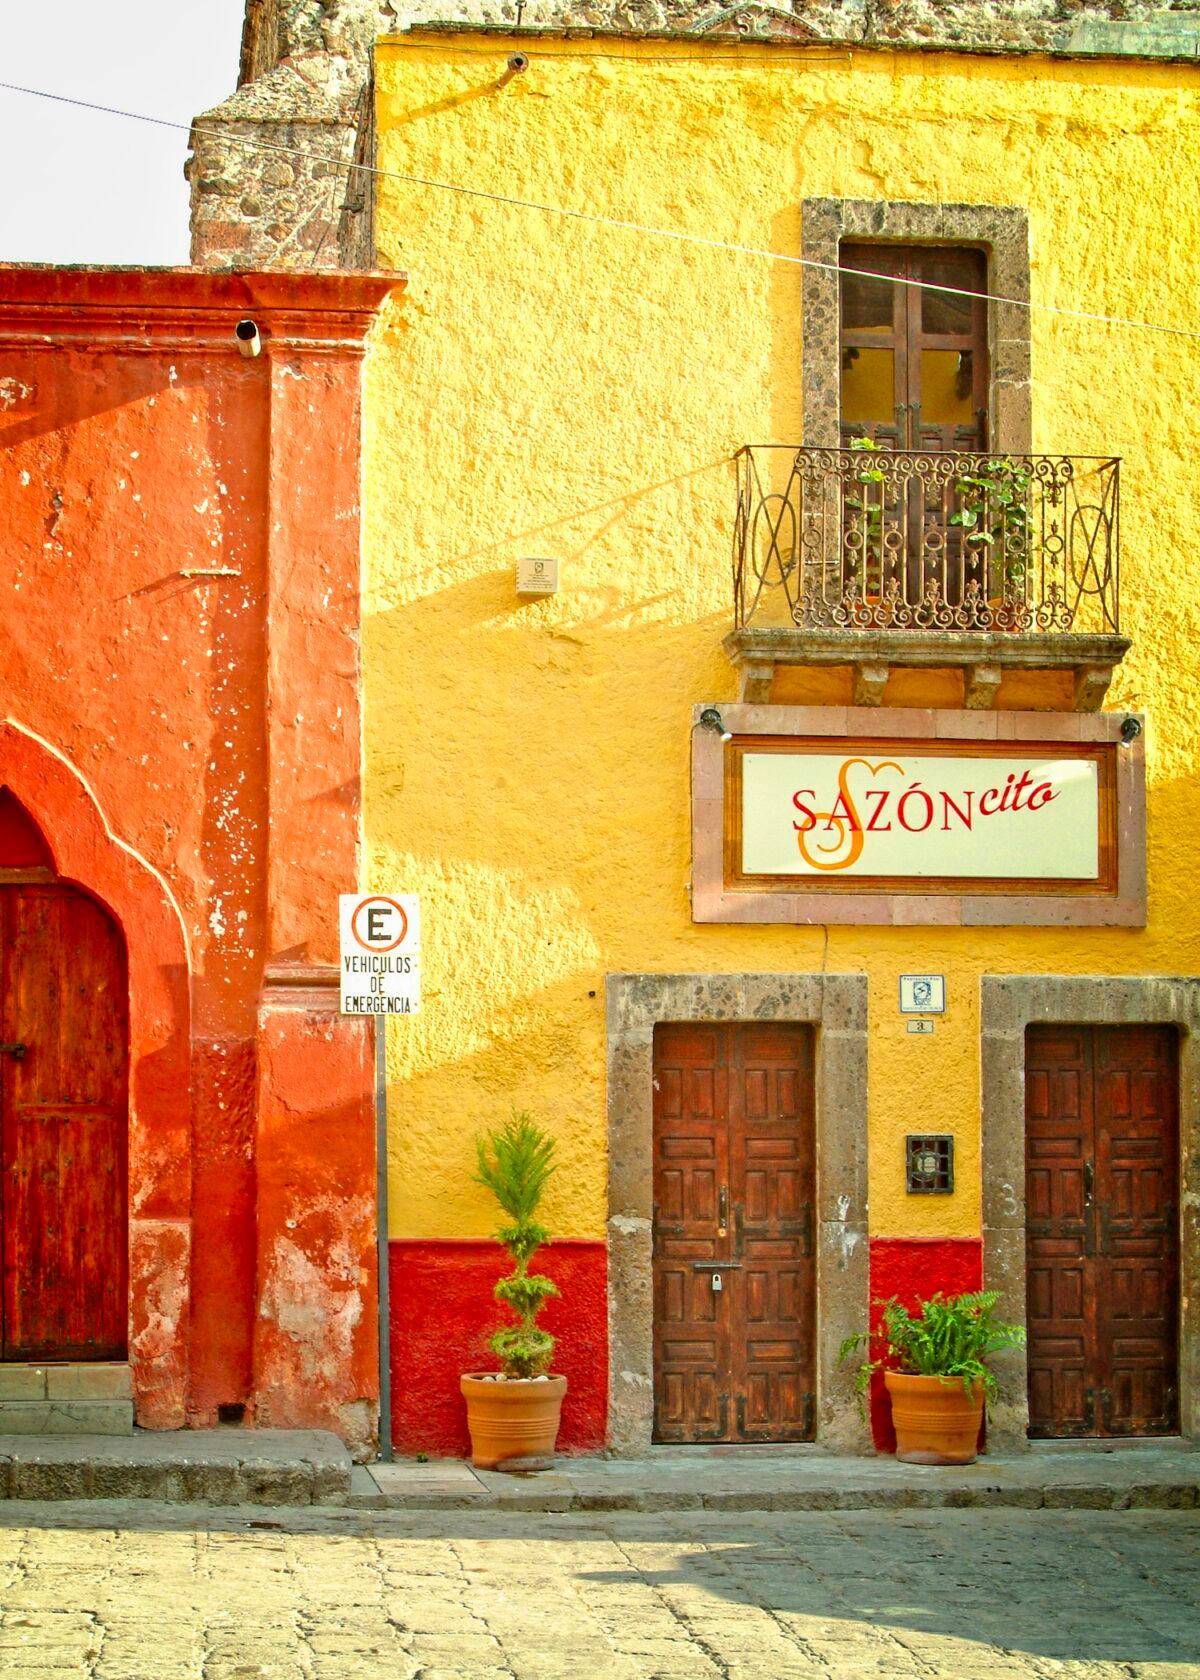 You are never certain what lies behind the colorful façades in San Miguel de Allende, but often it’s a courtyard with an attractive garden. (Fred J. Eckert)